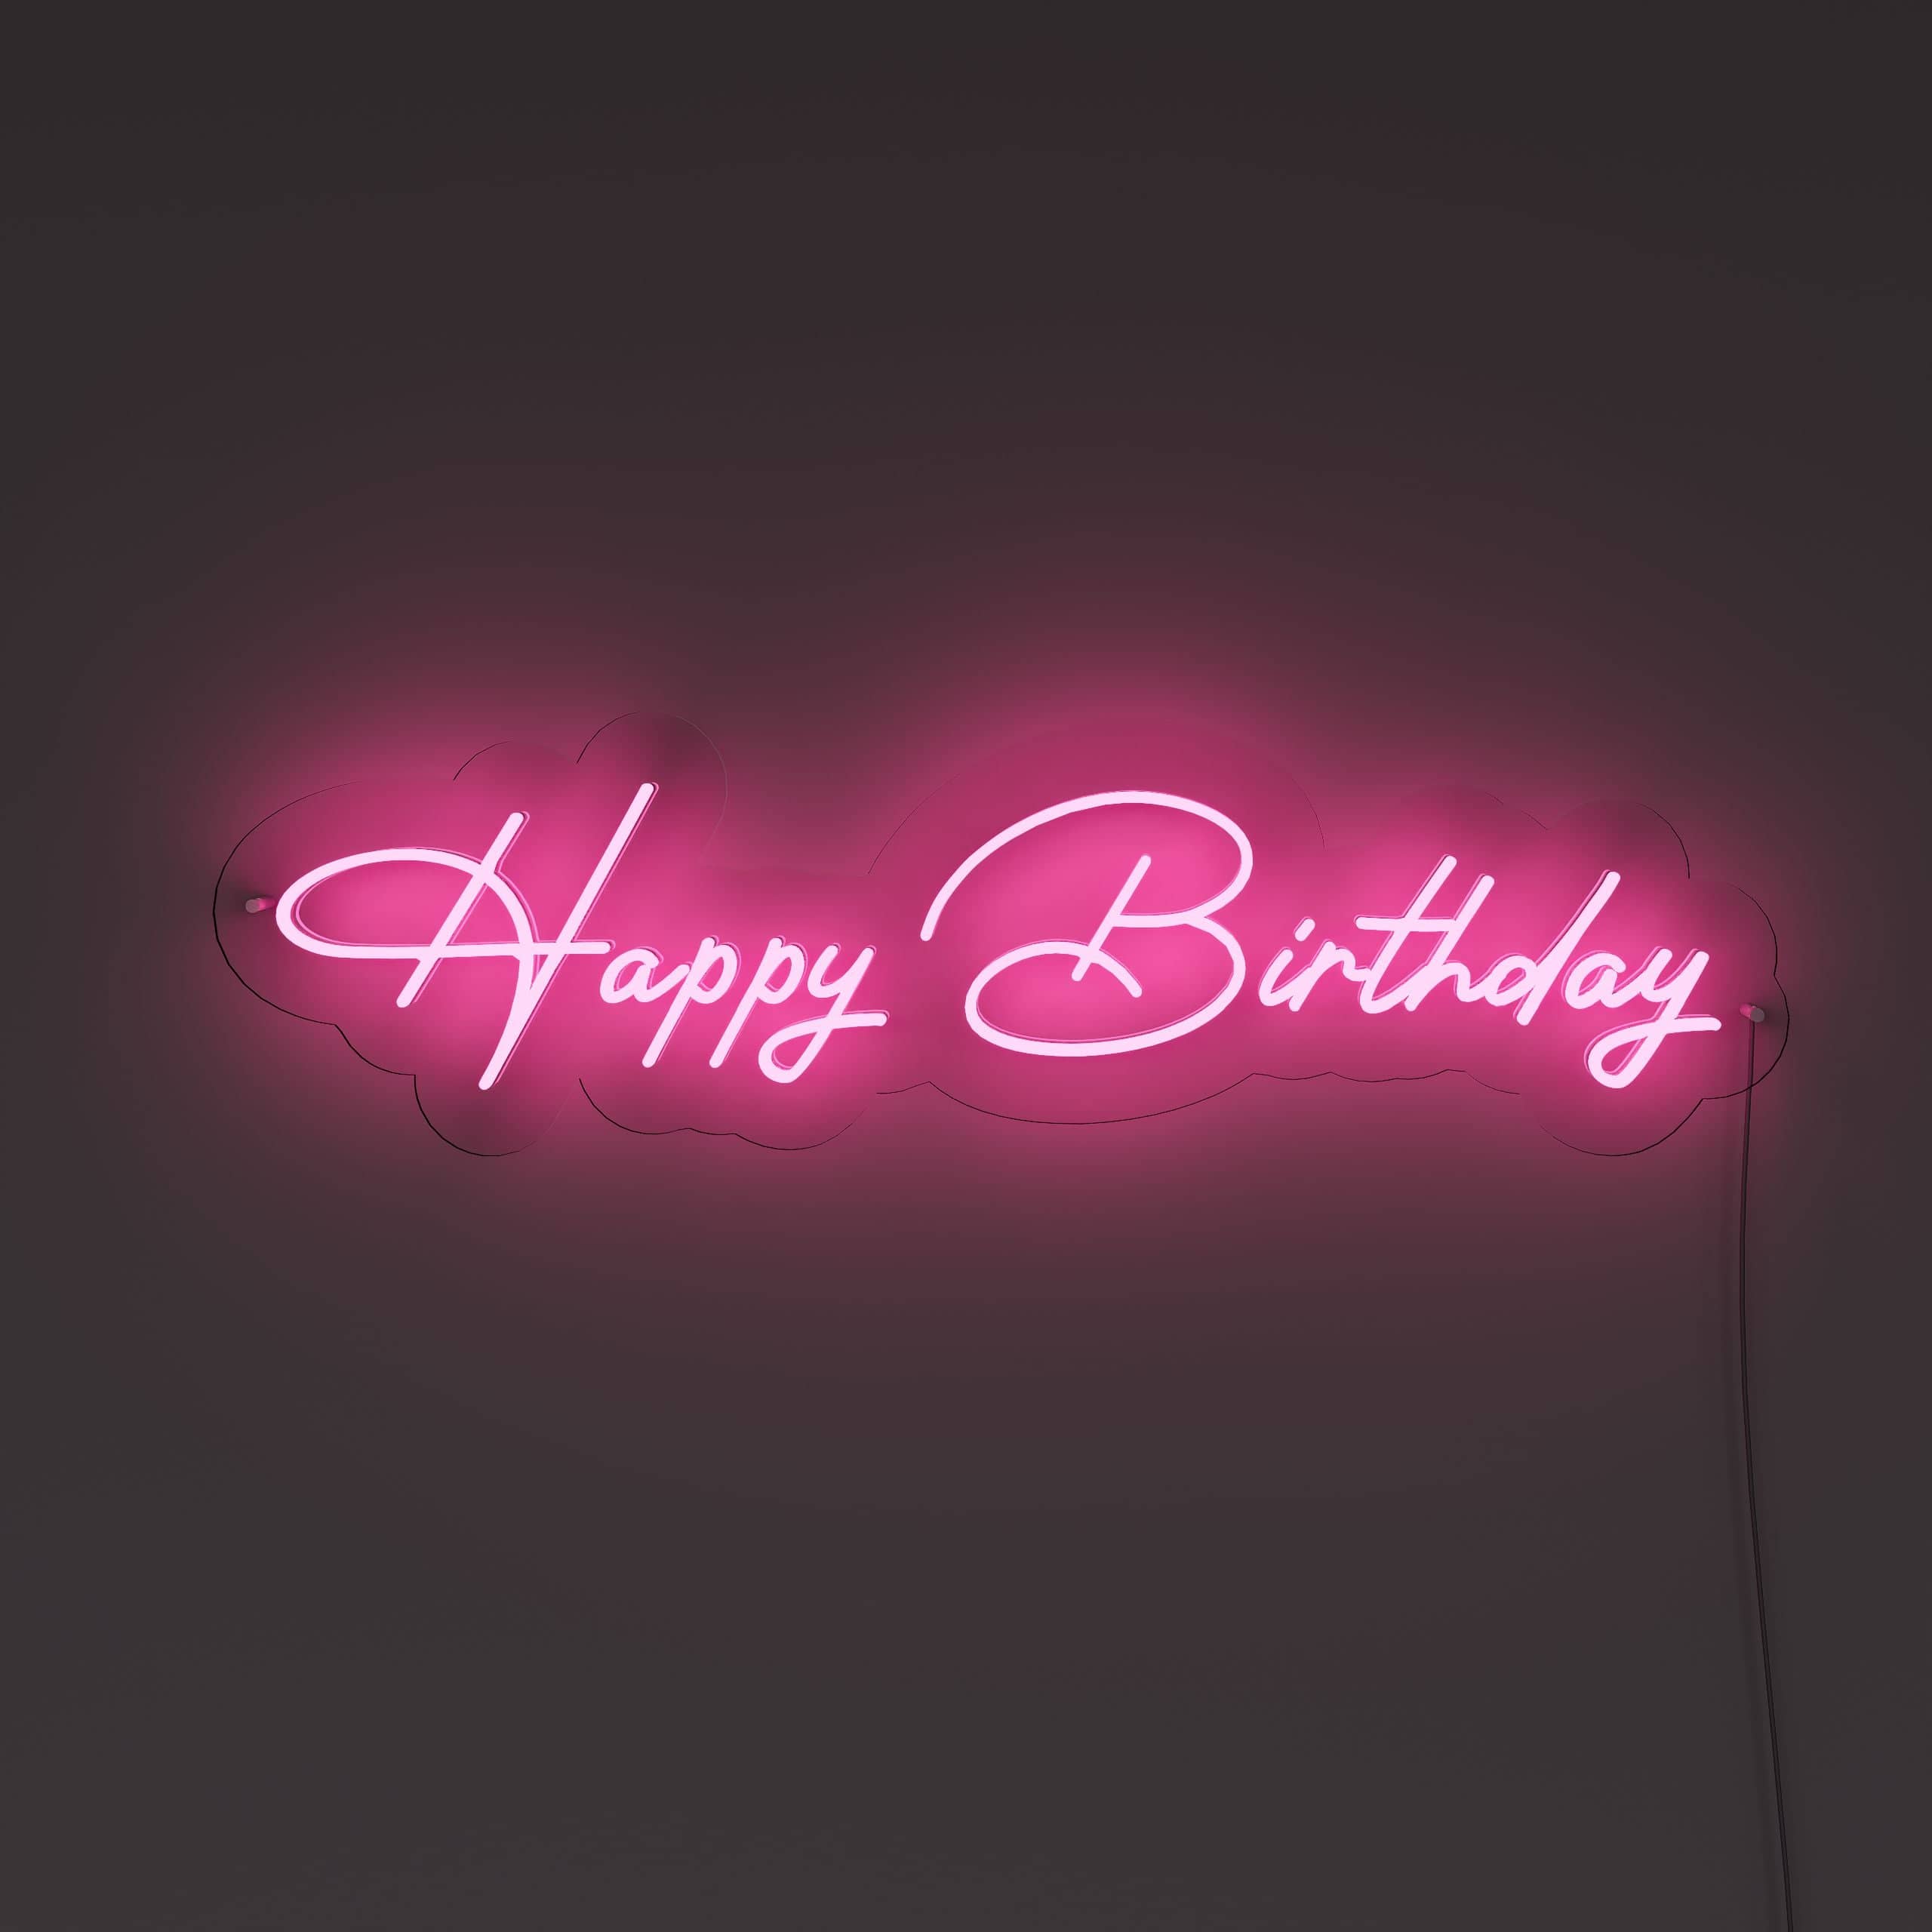 best-wishes-on-your-birthday!-neon-sign-lite